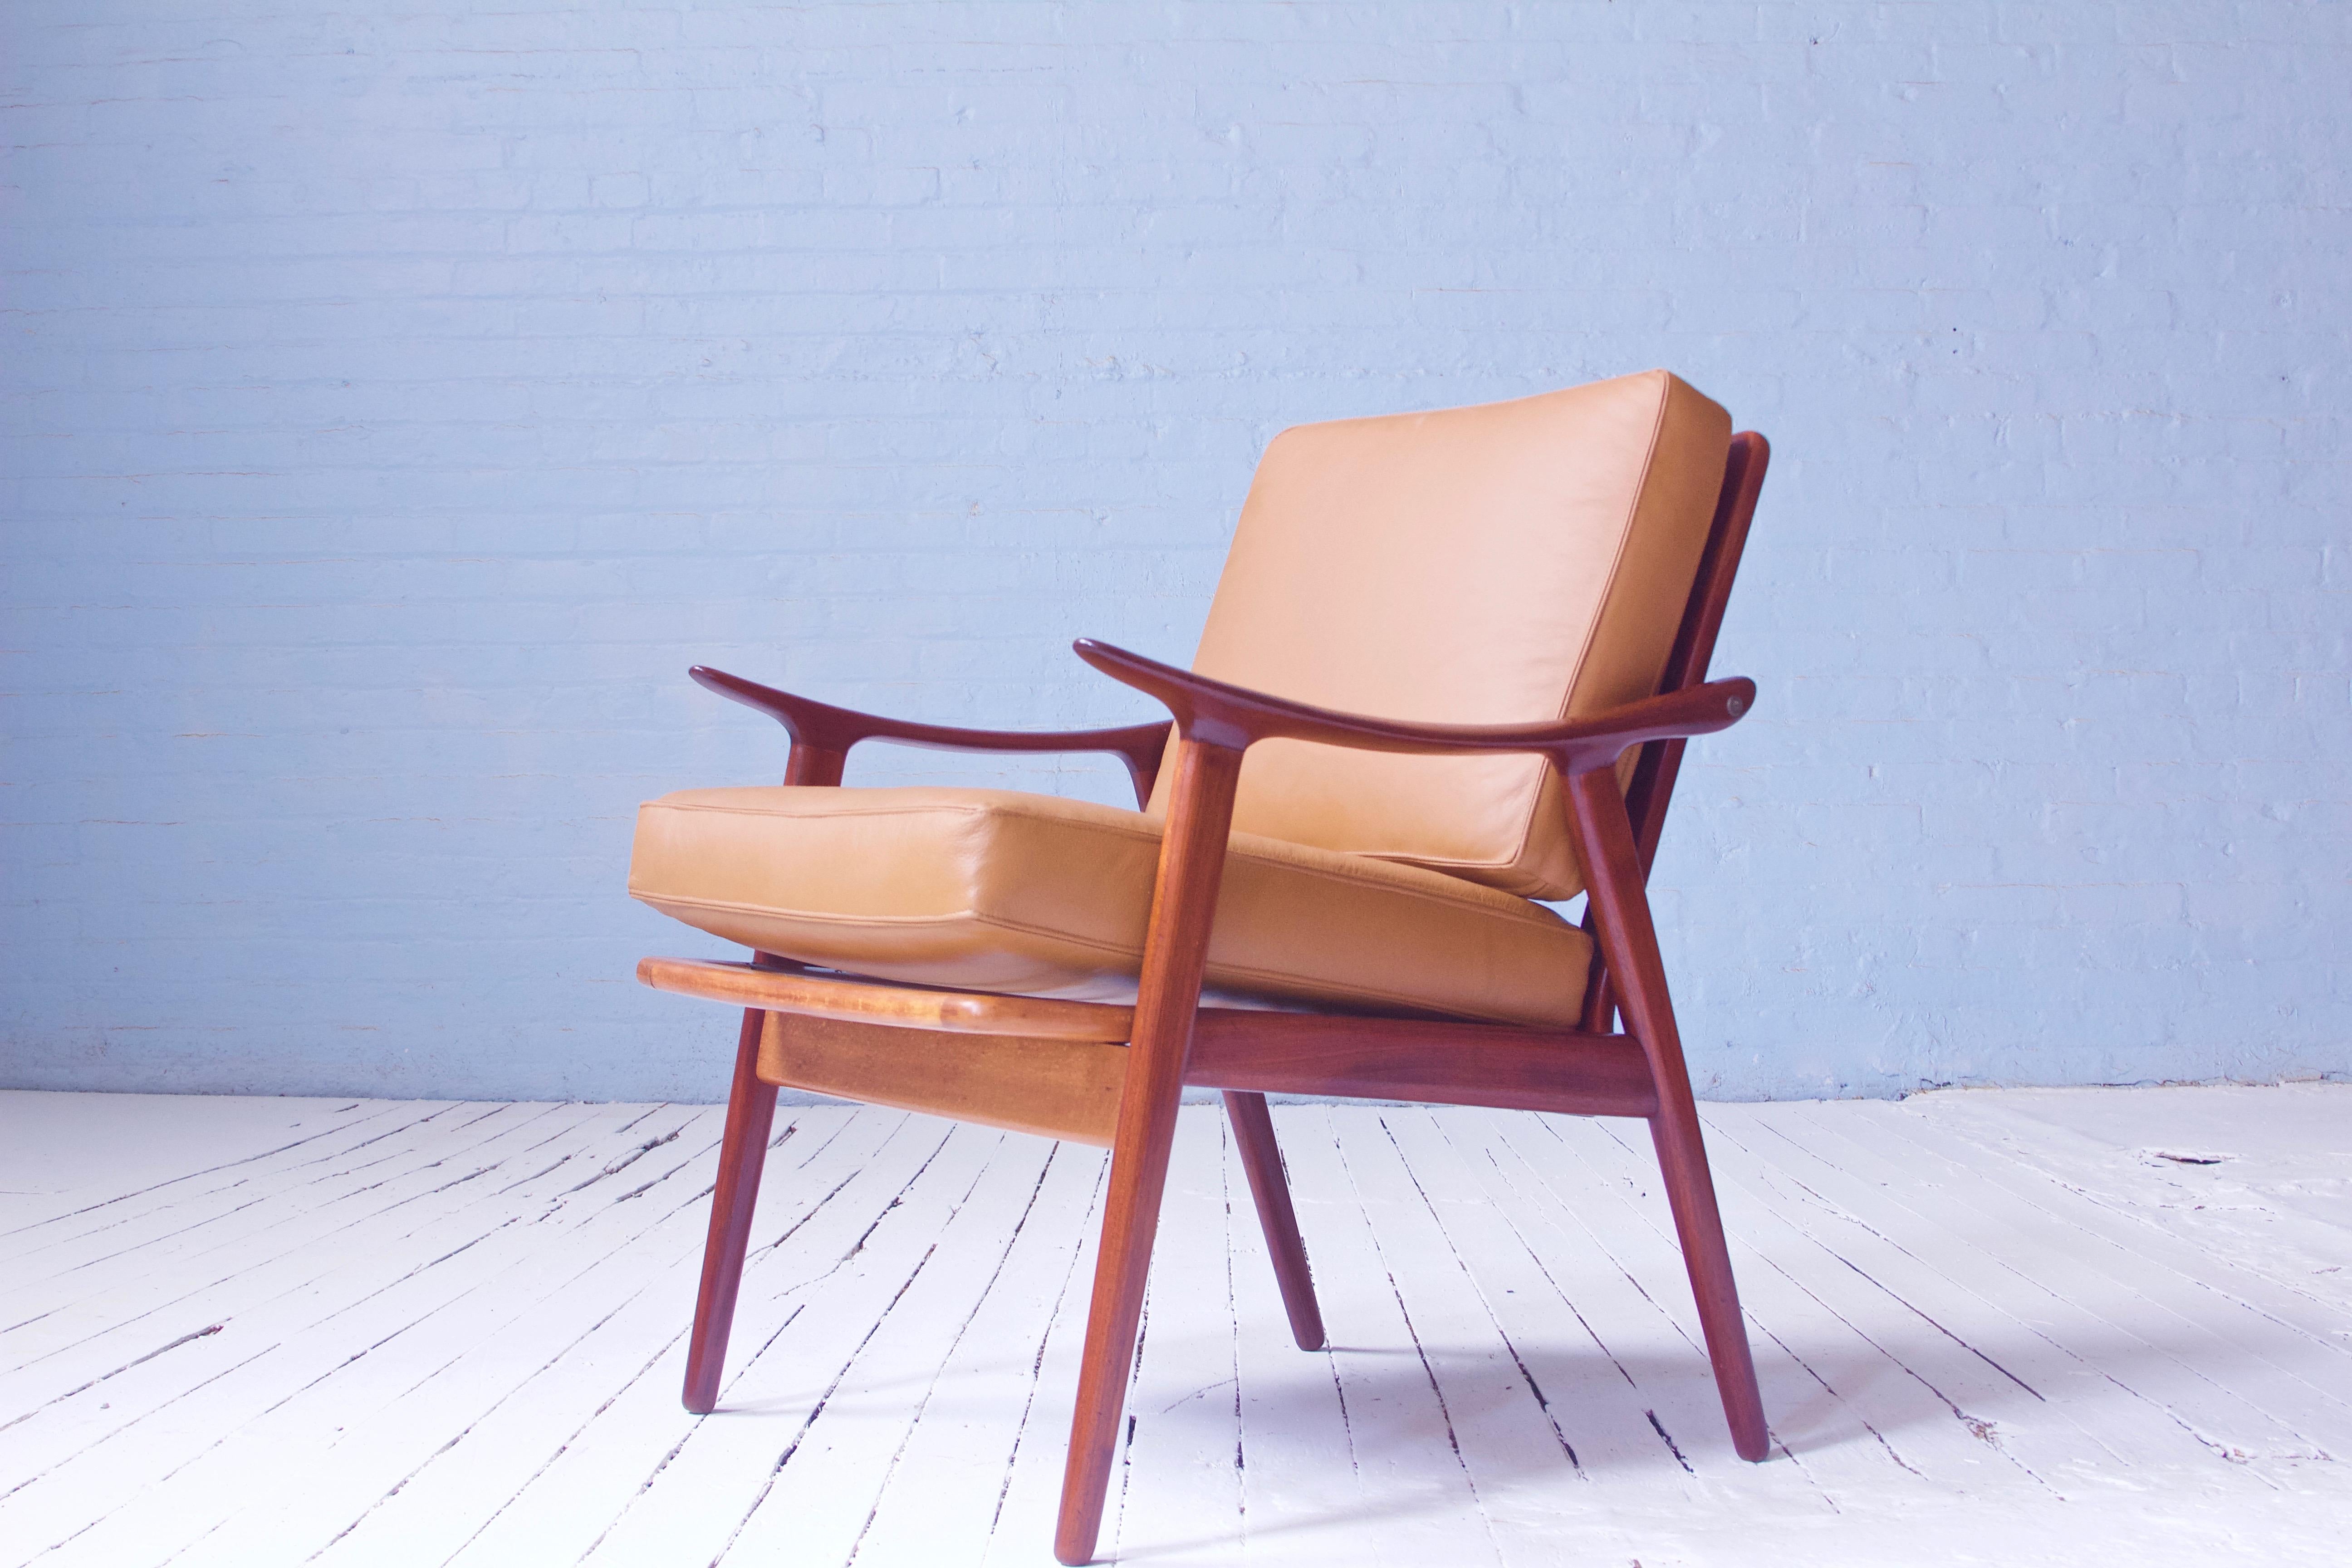 A brilliantly-conceived compact lounge chair in patinated hand-sculpted teak and cognac leather upholstery with baseball stitching designed by Norwegian industrial designer Fredrik A. Kayser, 1950s. This frame features a completely demountable